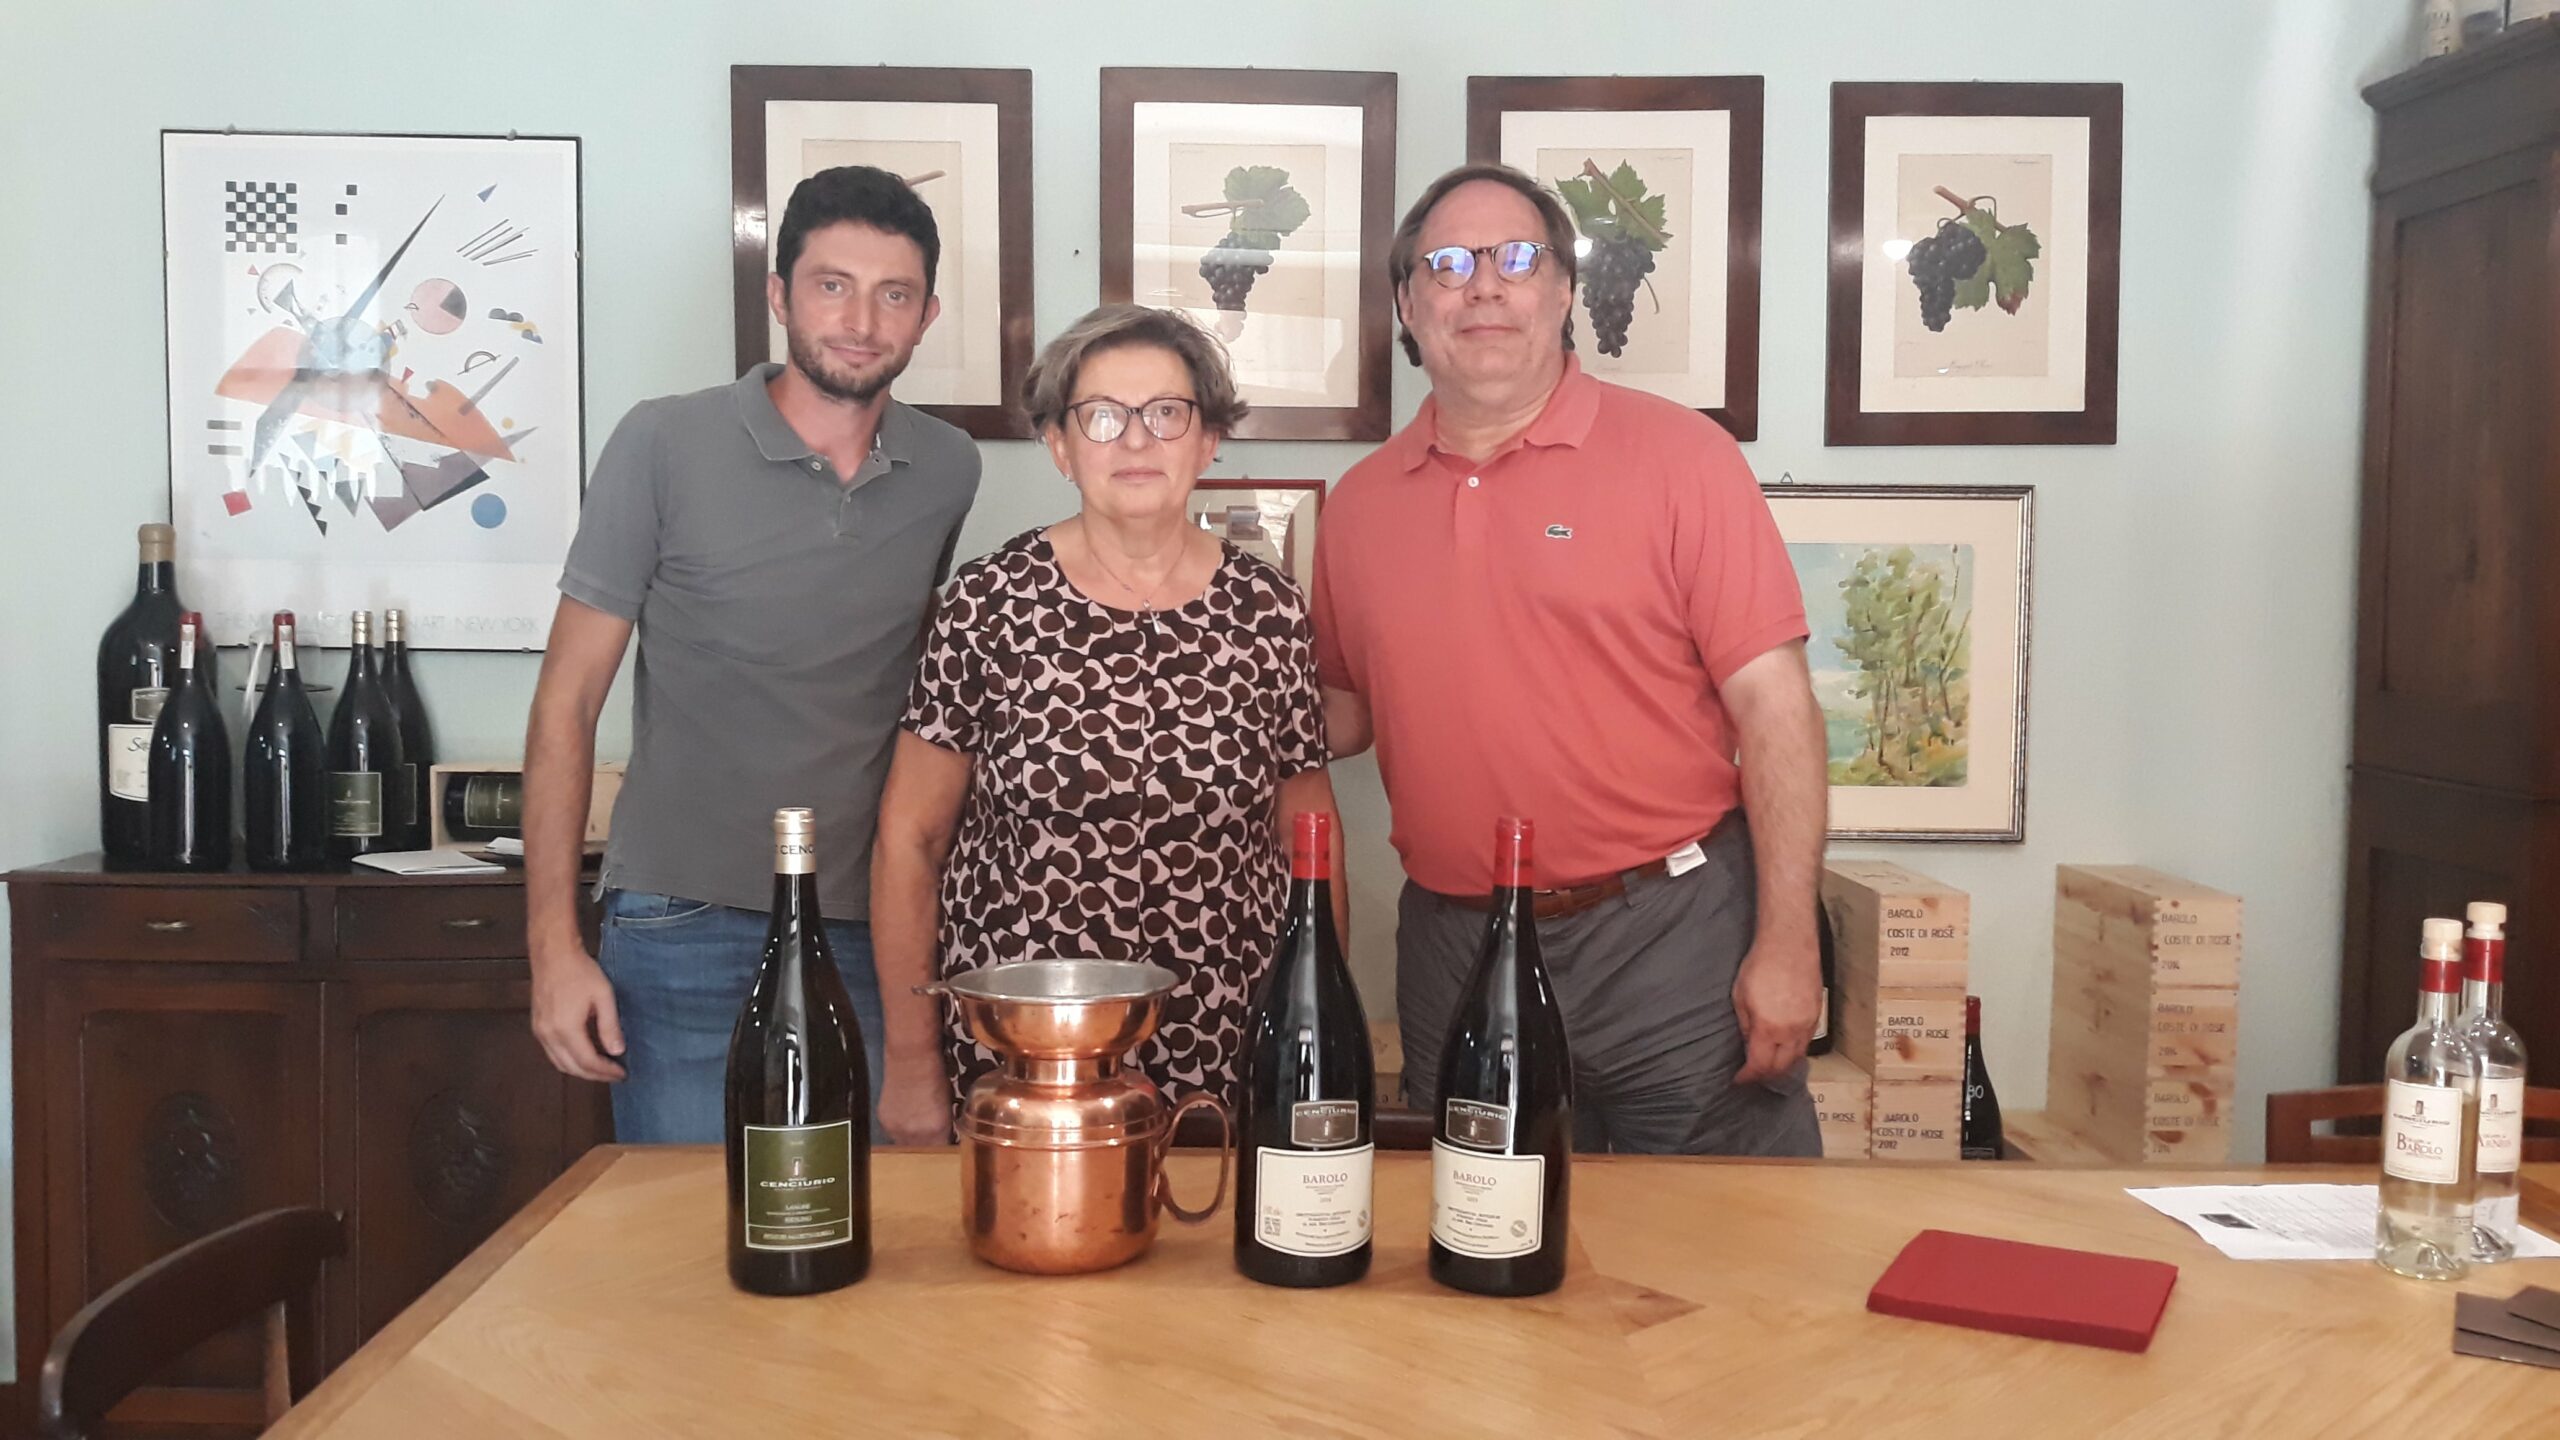 Ian-tasting-at-Bric-Cenciurio-in-Barolo-this-July-and-finding-oneof-the-years-most-delicious-sweet-wines-the-Birbet-min-scaled-1-3-1